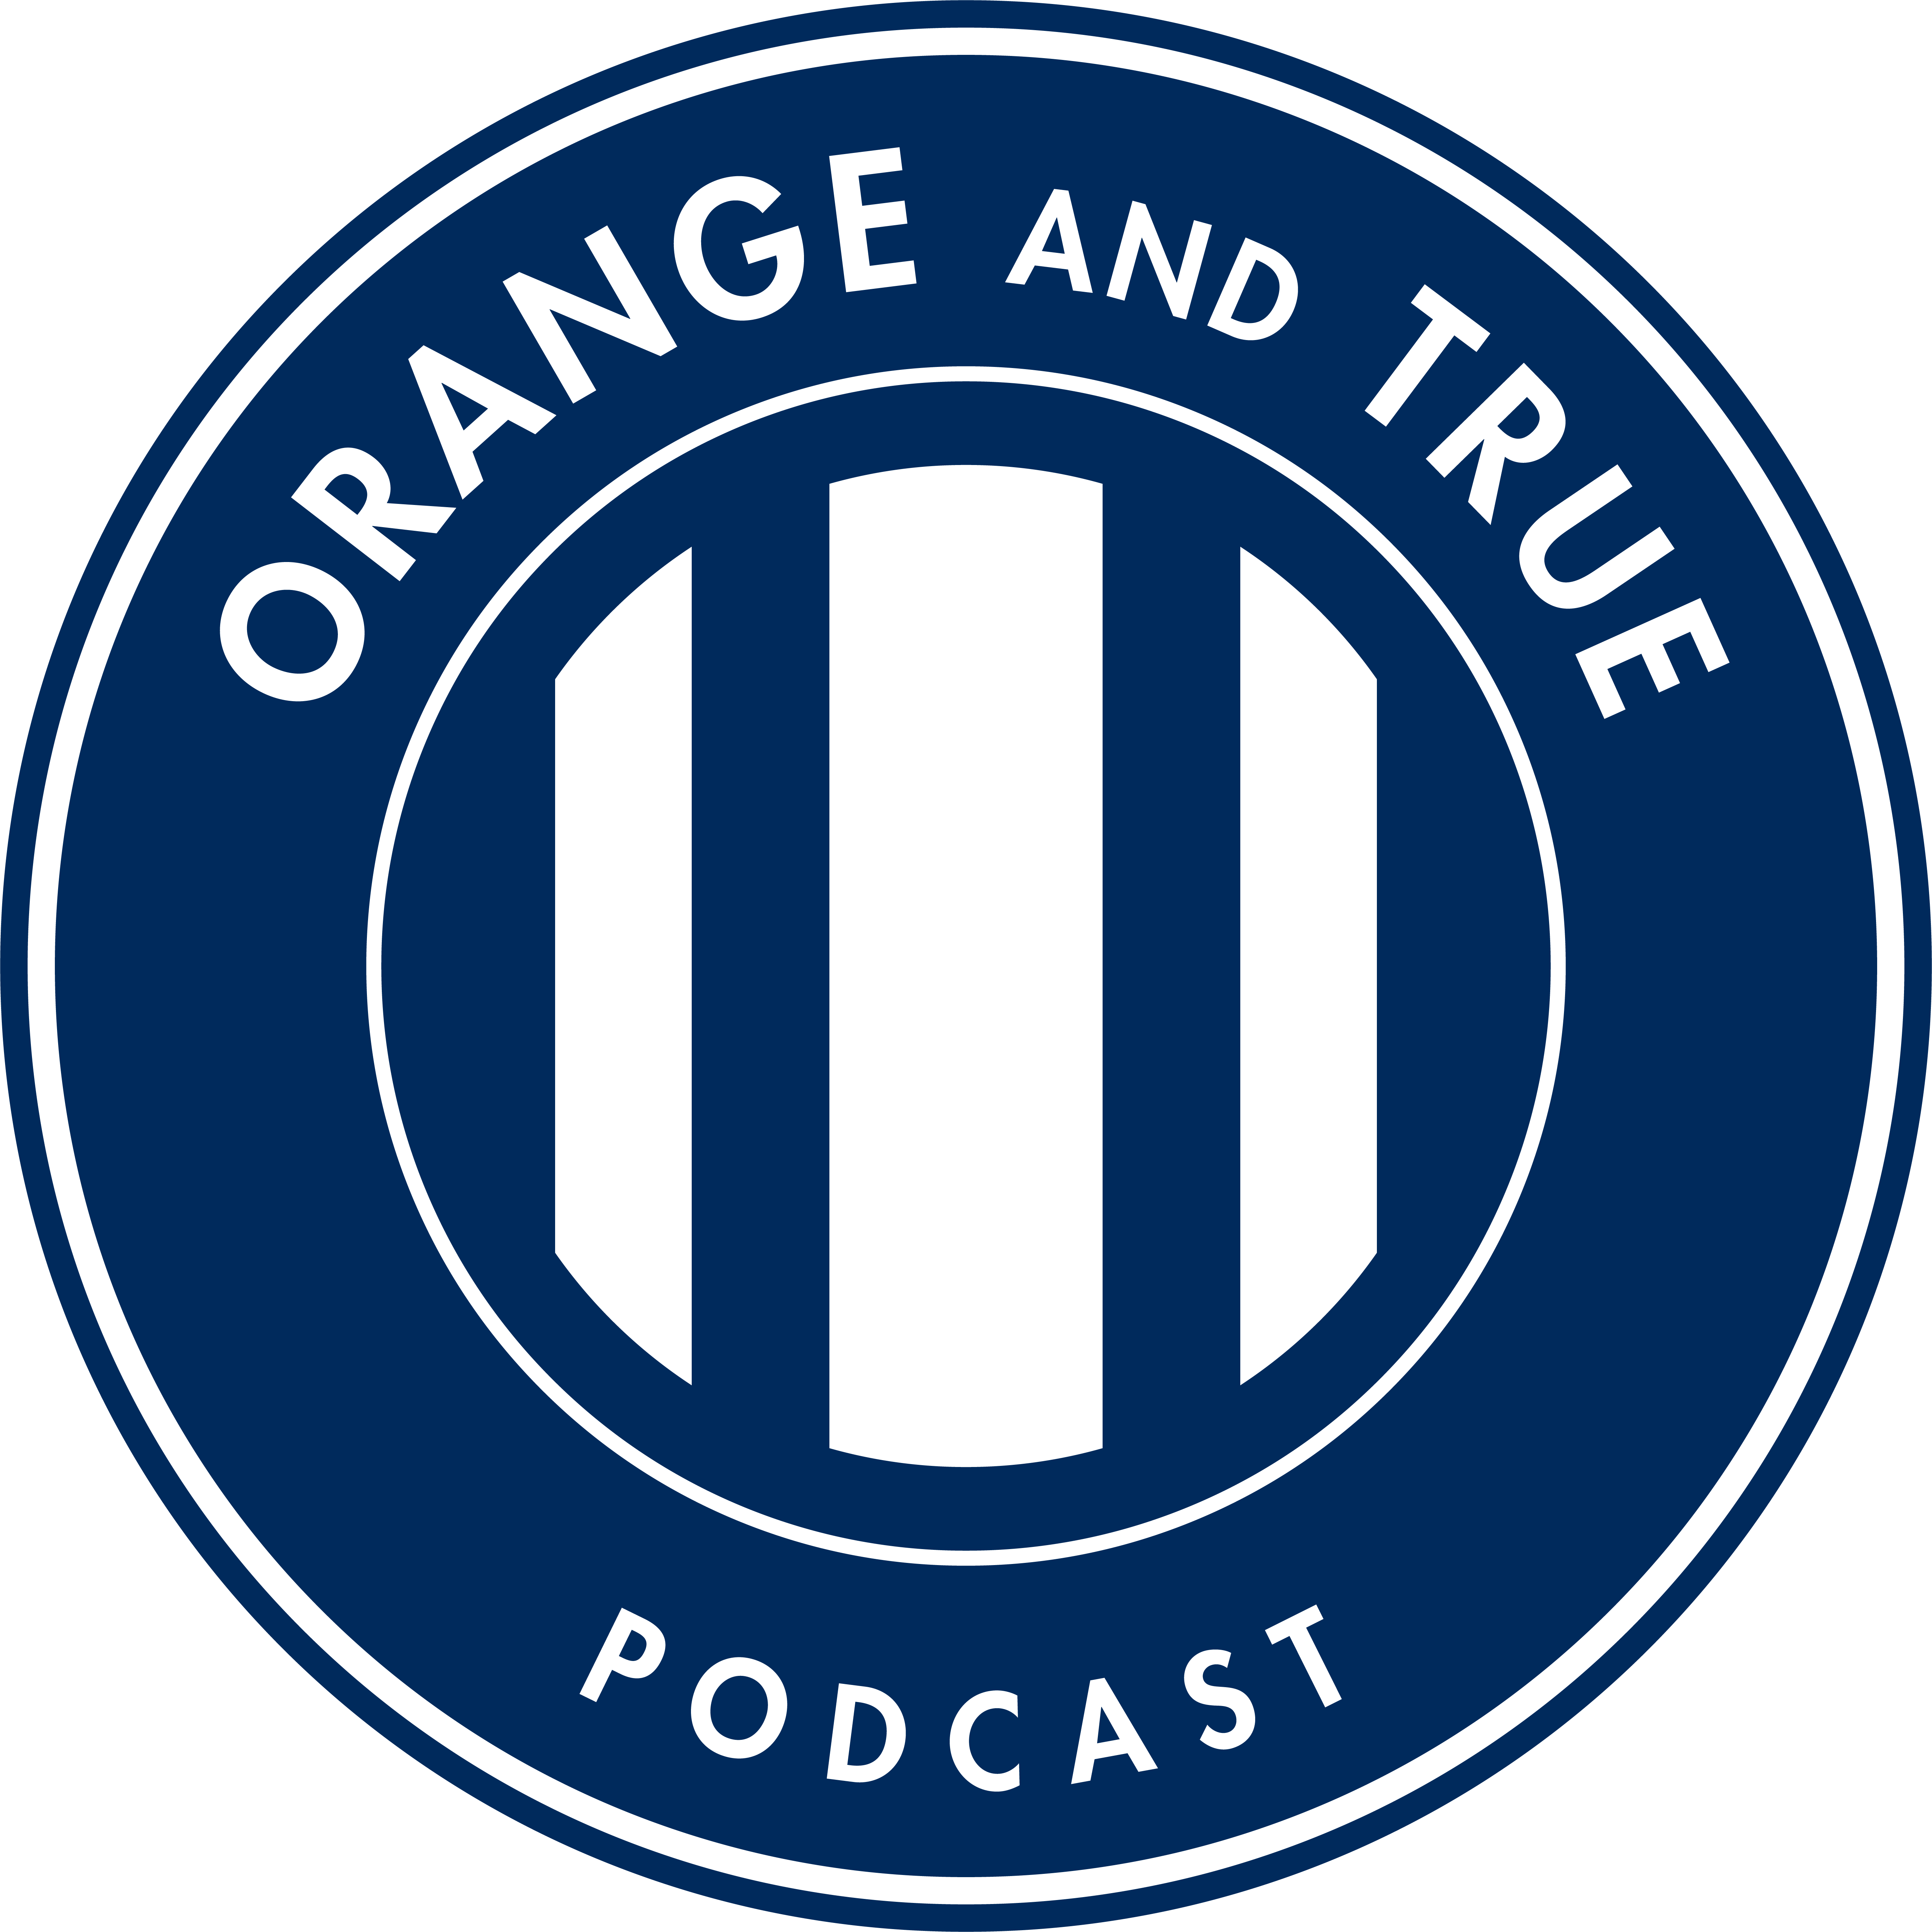 Orange and True Episode 192 - 04-19-2022 - The ’S’ Stands for ”Star Wars as in Lego Star Wars”